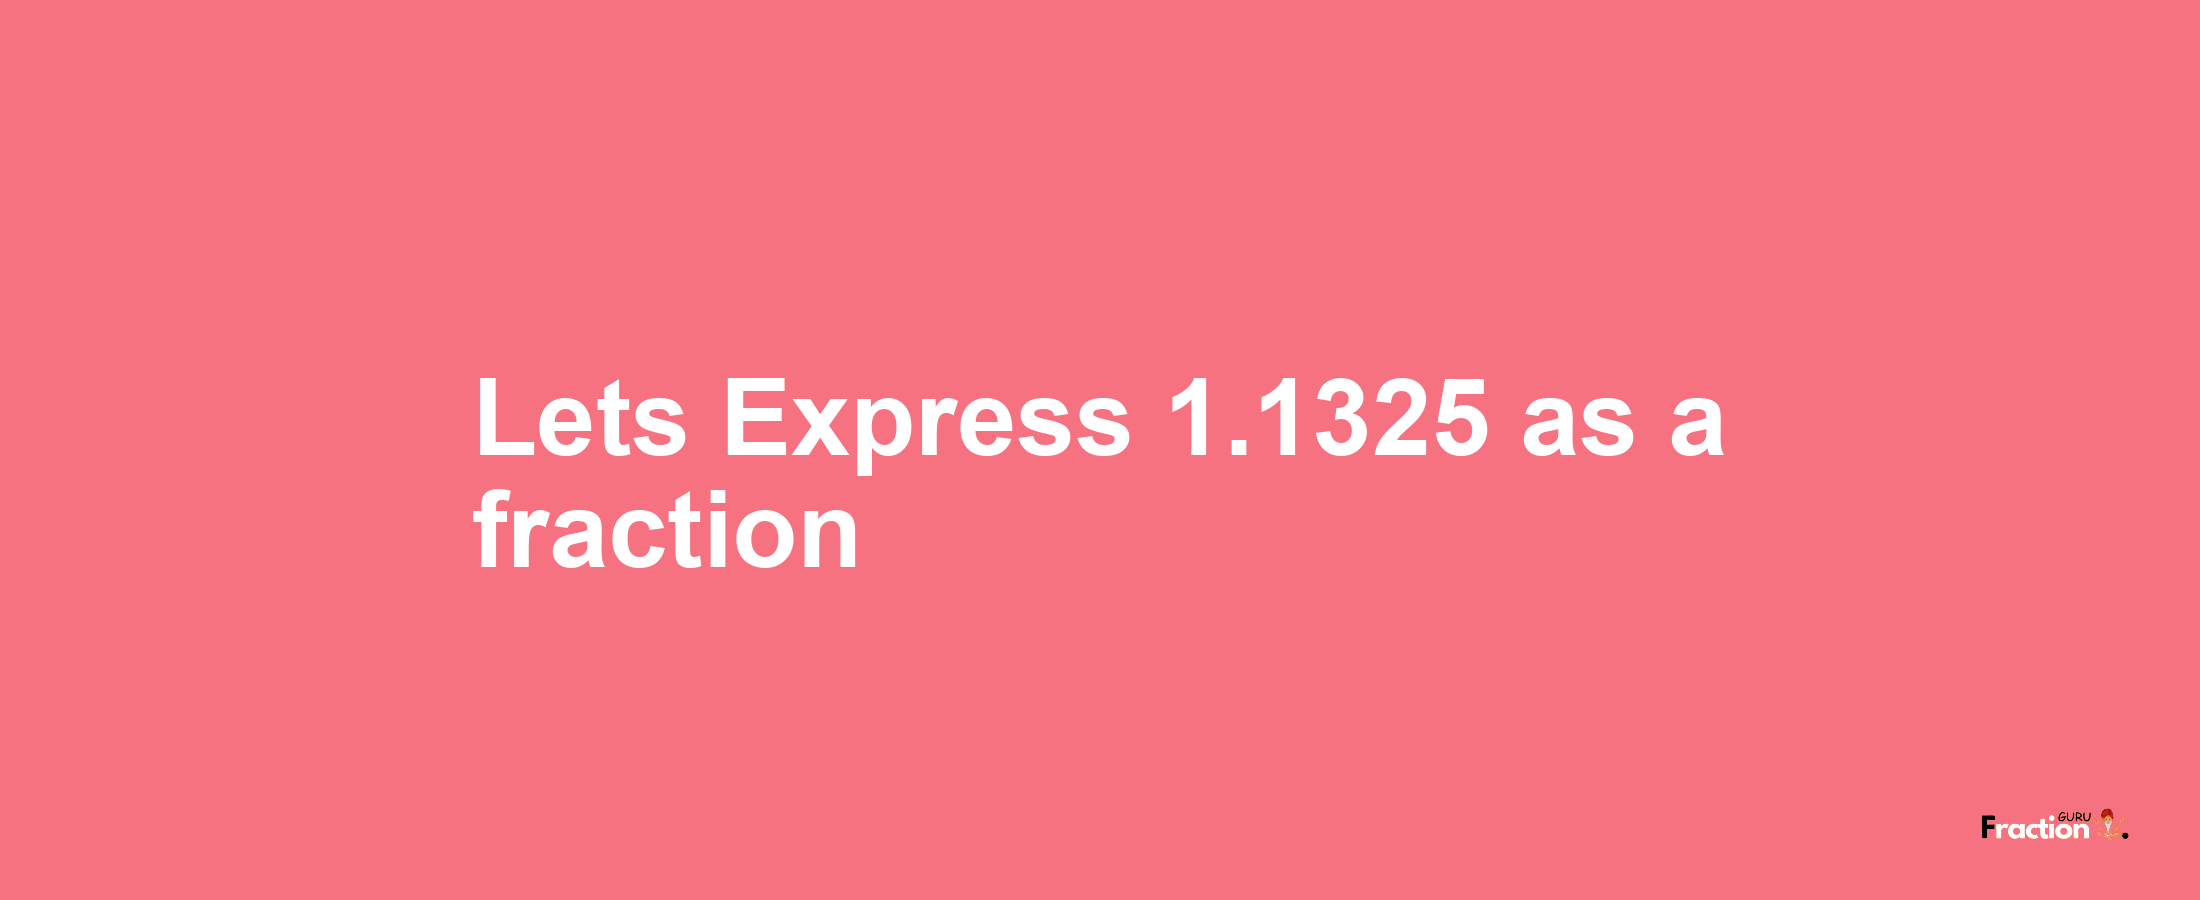 Lets Express 1.1325 as afraction